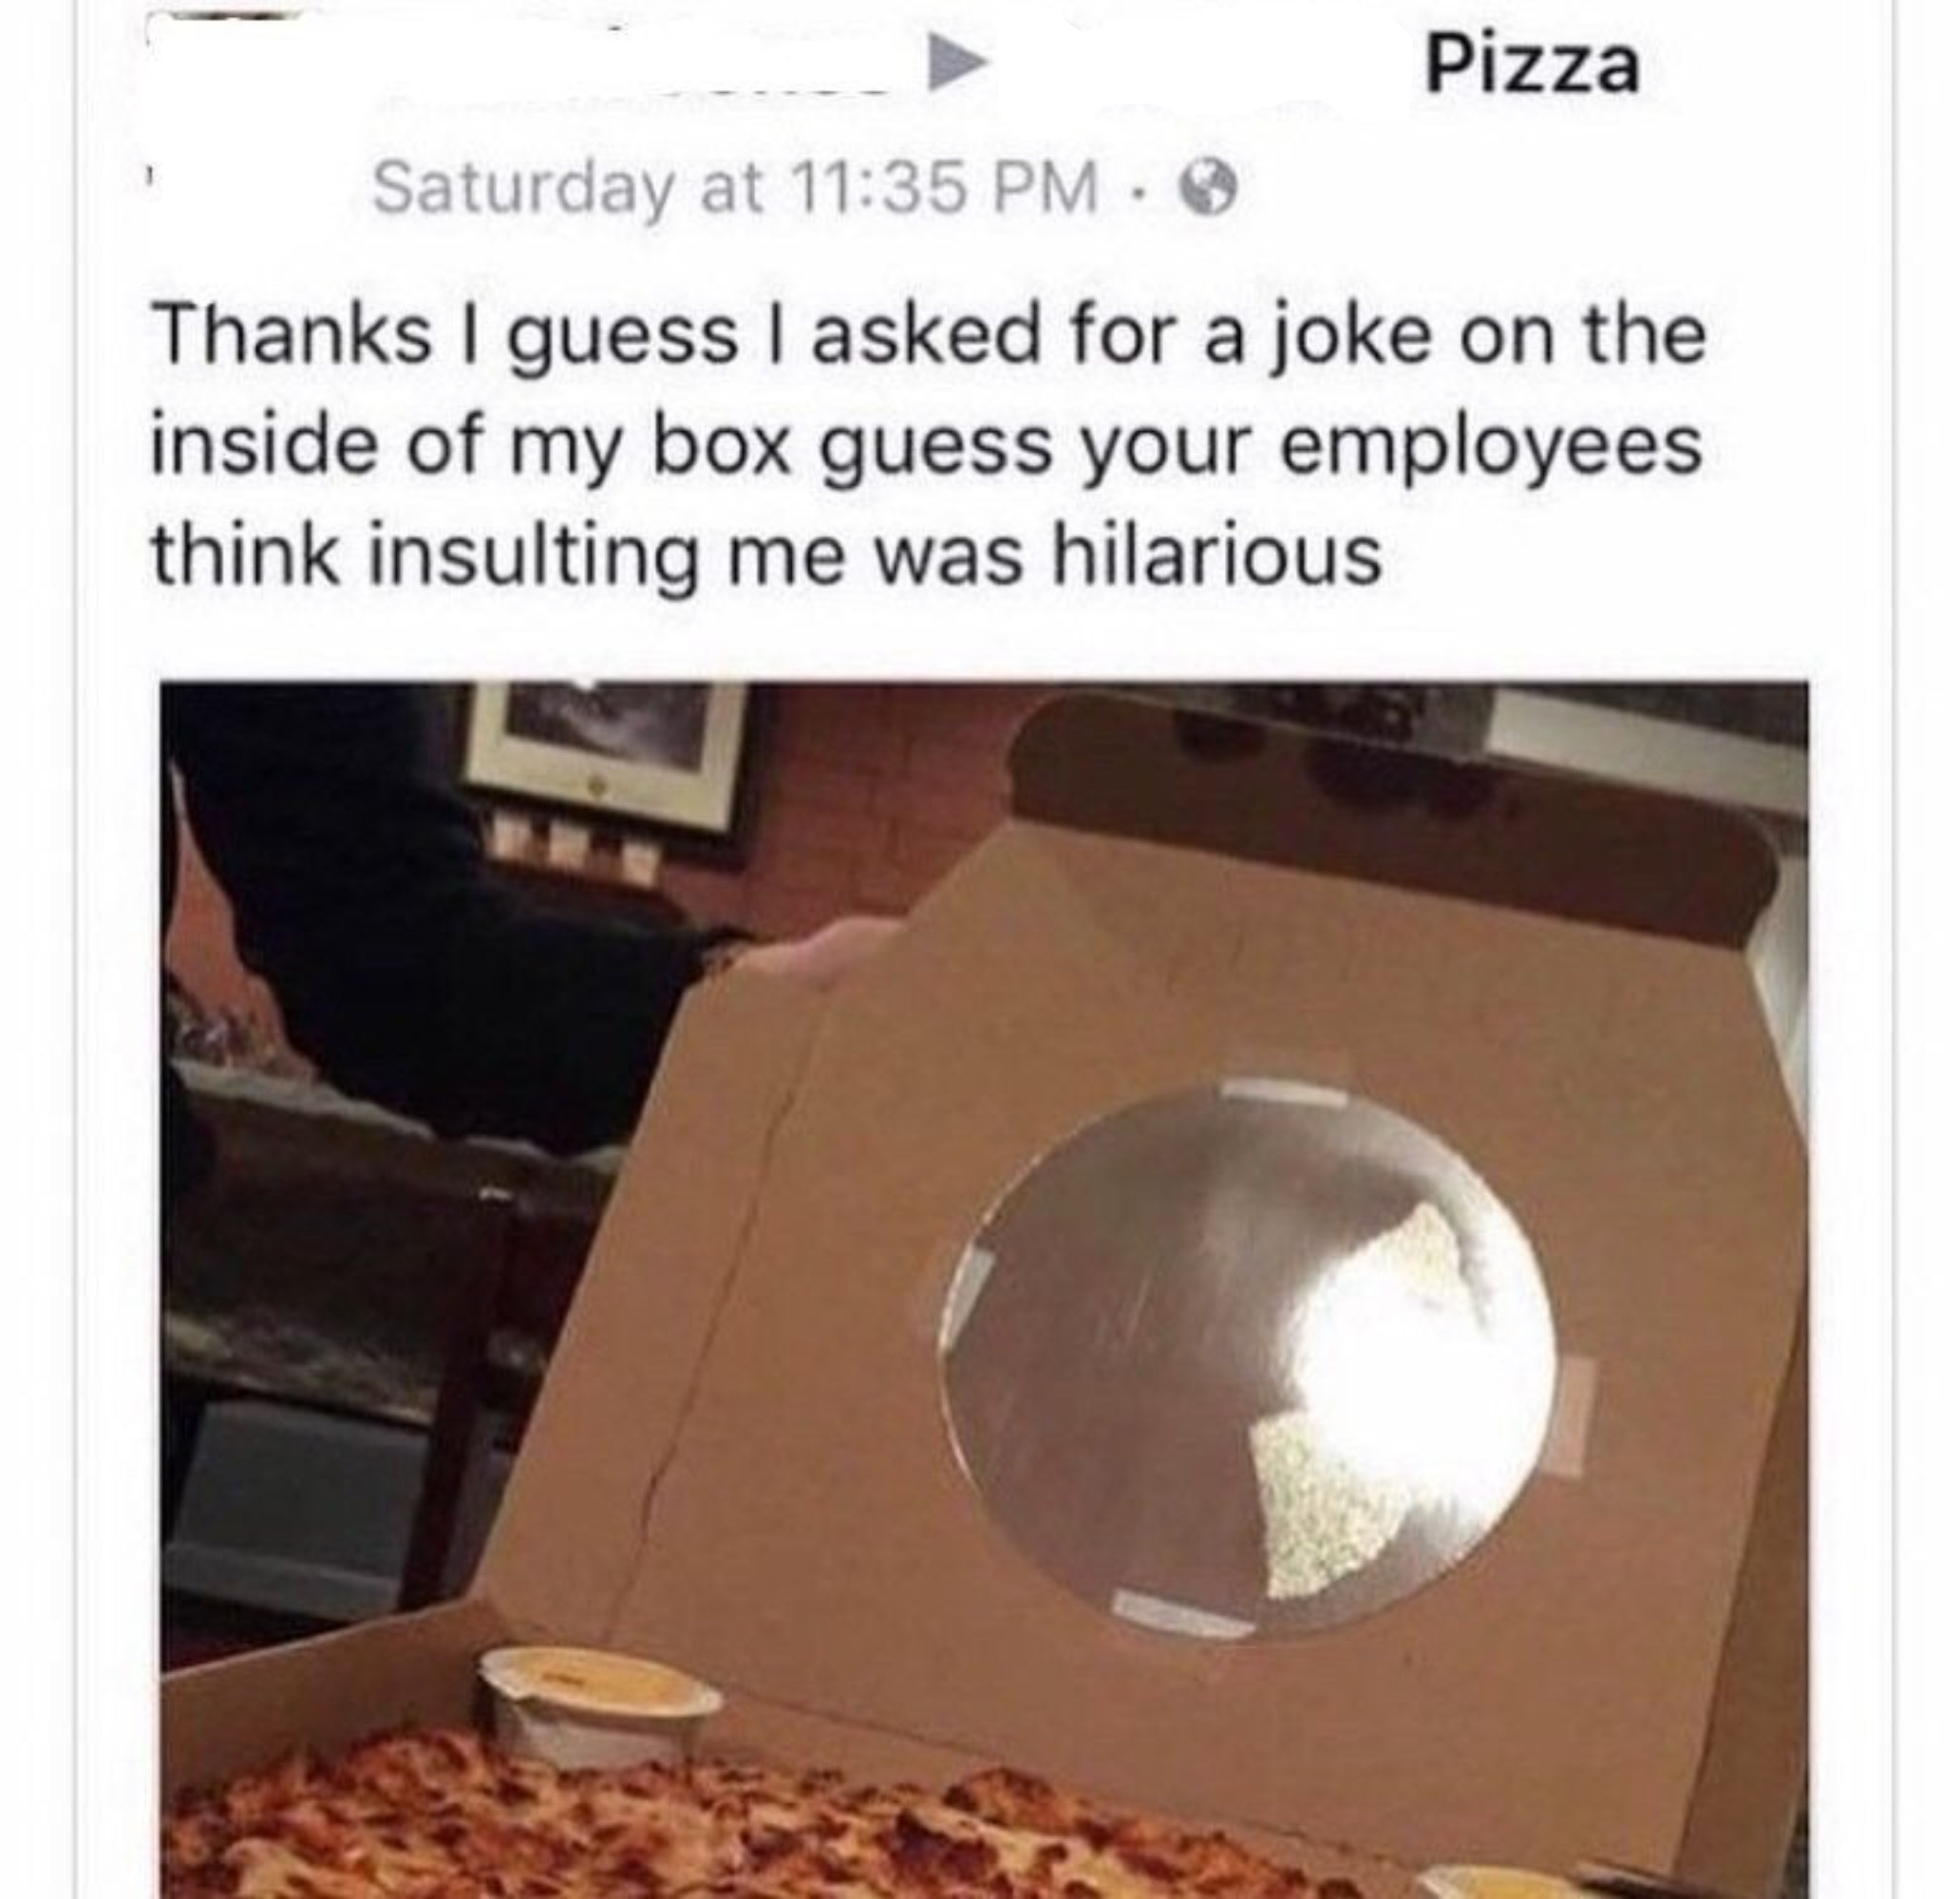 A person asks a pizza place to insult them and they send a mirror on a pizza box